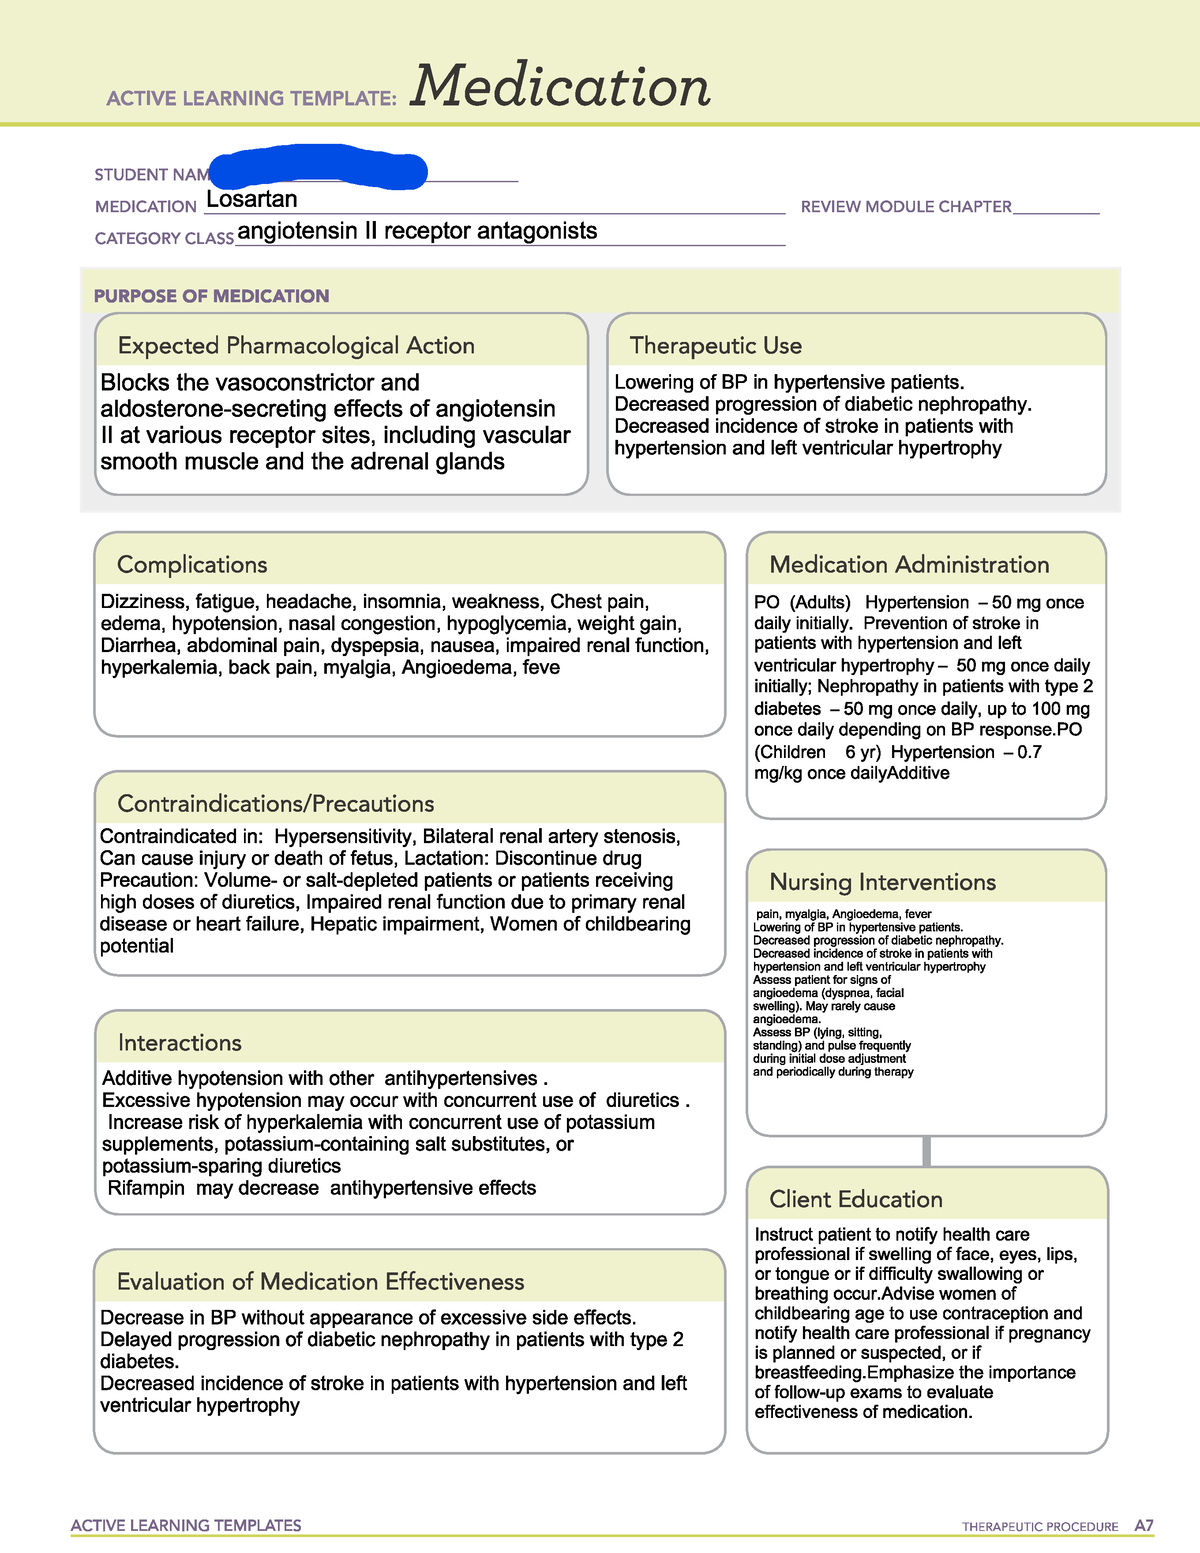 losartan-ati-med-template-ati-med-template-ati-medication-template-for